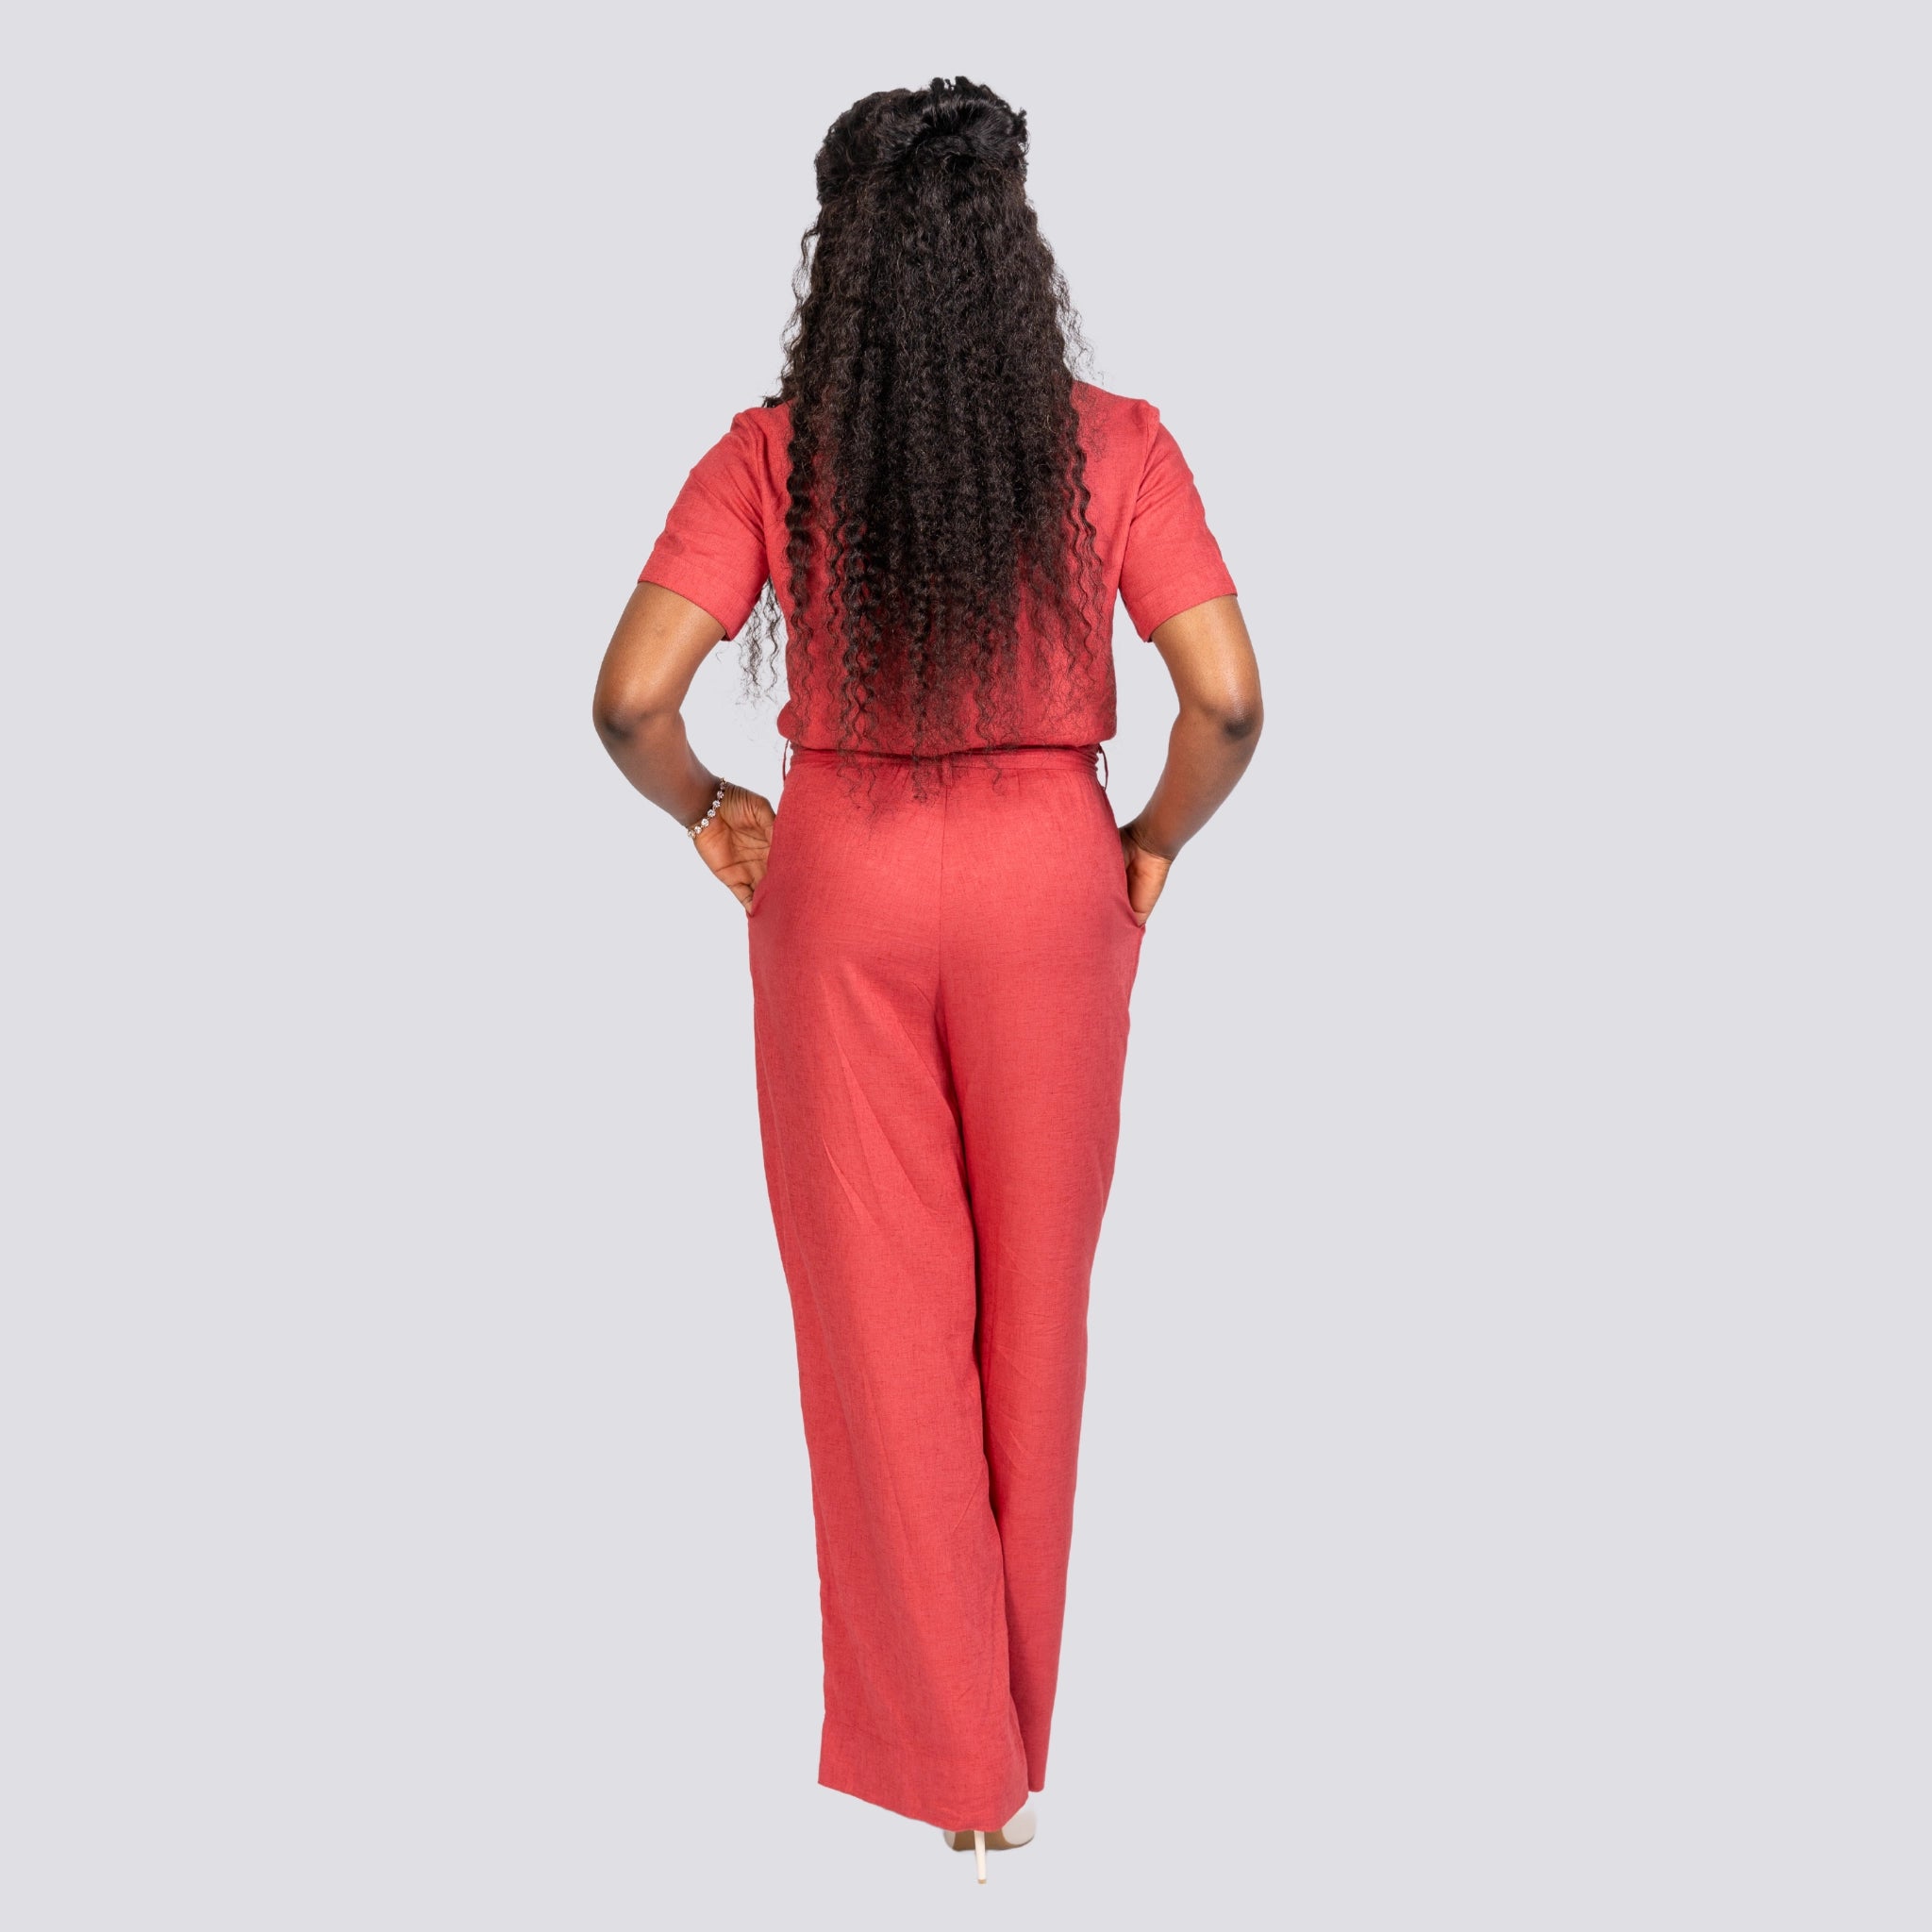 Woman in Karee Milano Red Serenity Viscose Linen Jumpsuit standing with her back to the camera, hands on hips, against a light gray background.